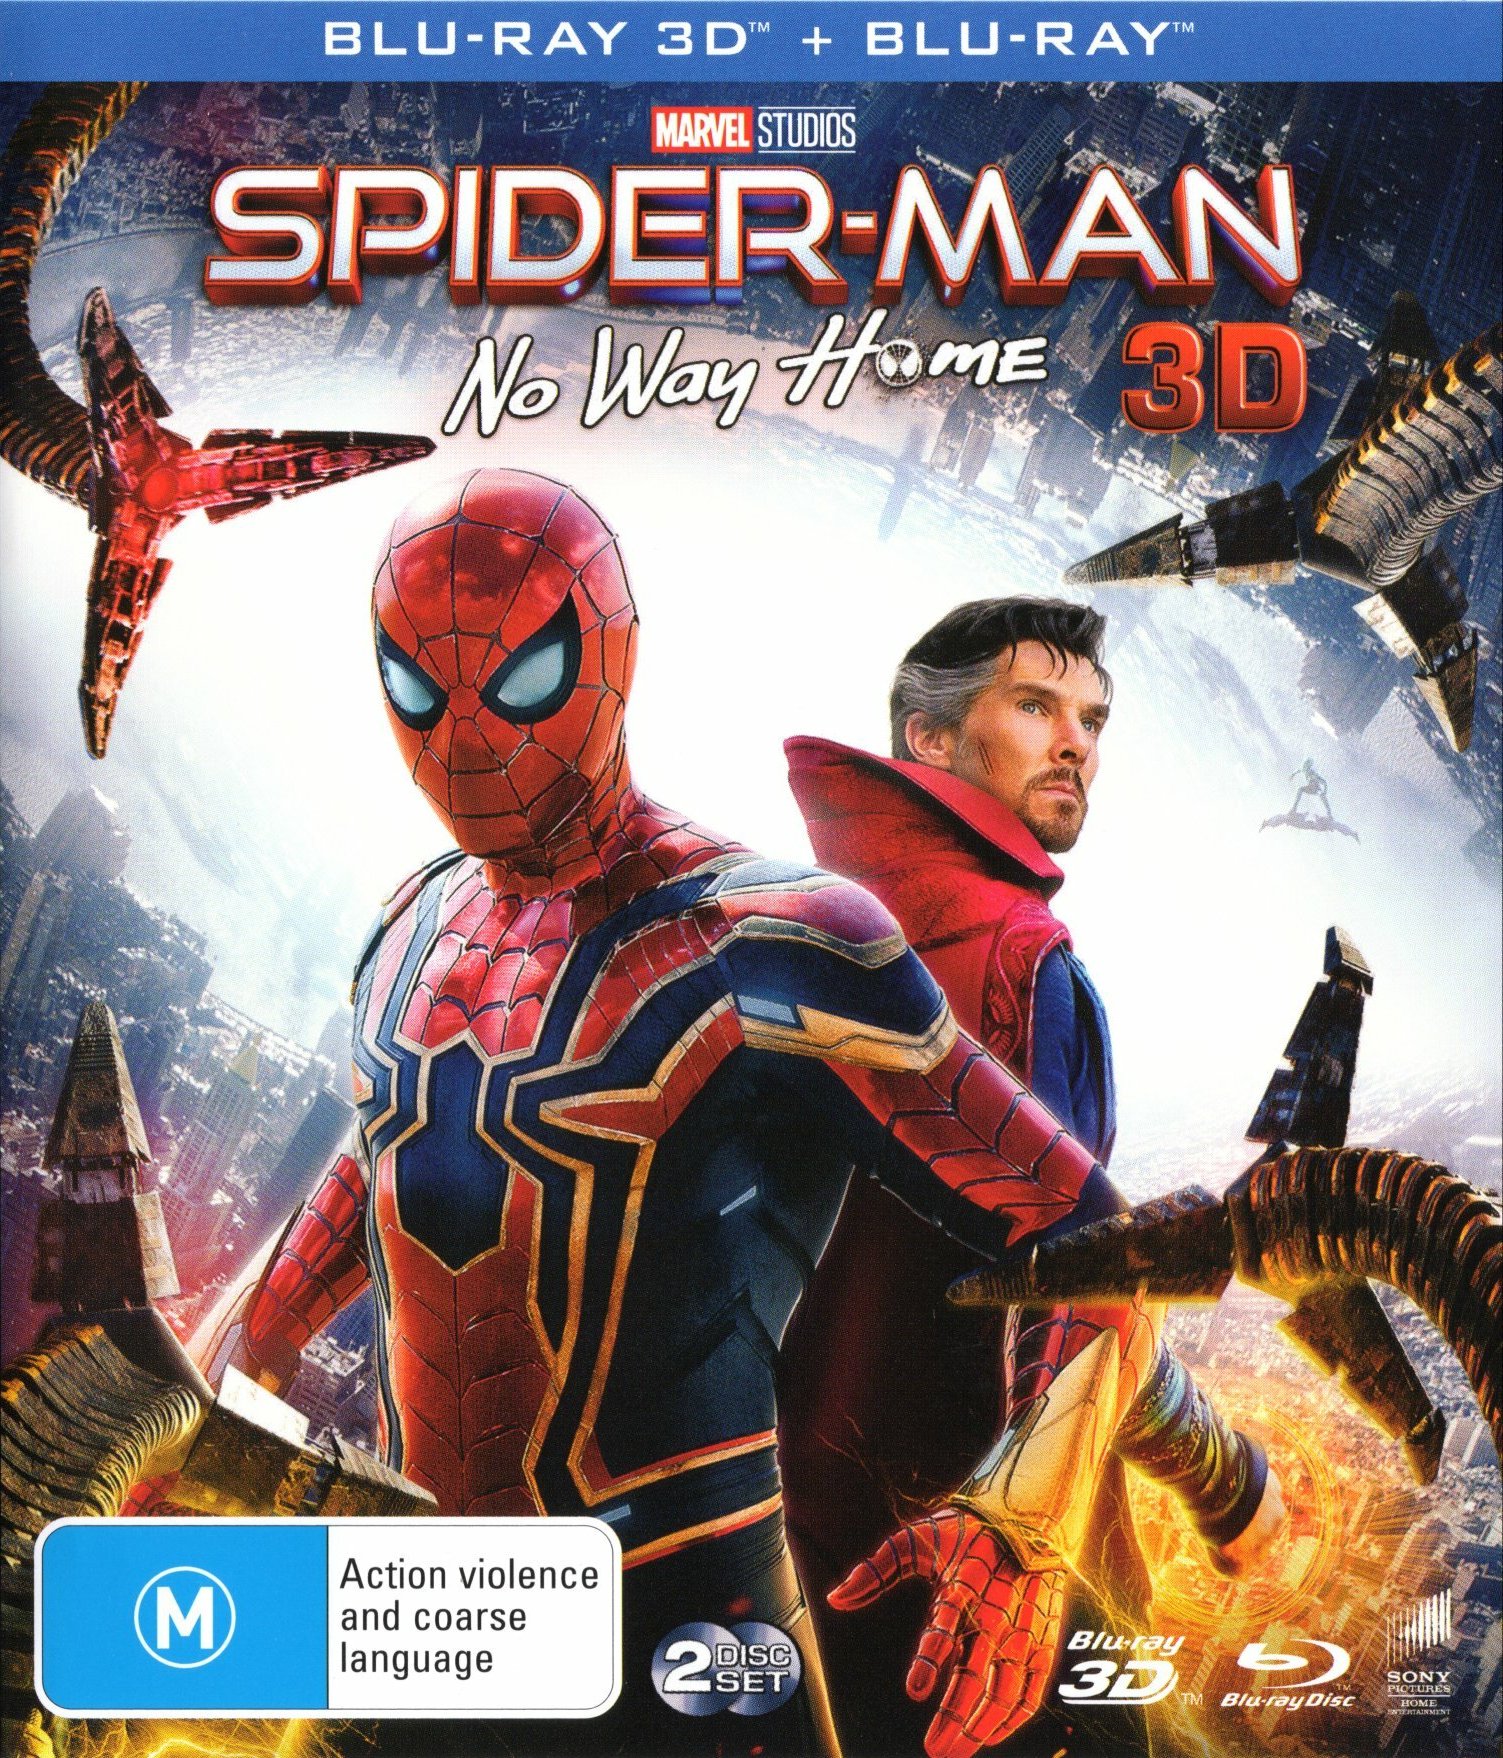 Spiderman No Way Home 3D (3D blu-ray eng subs)